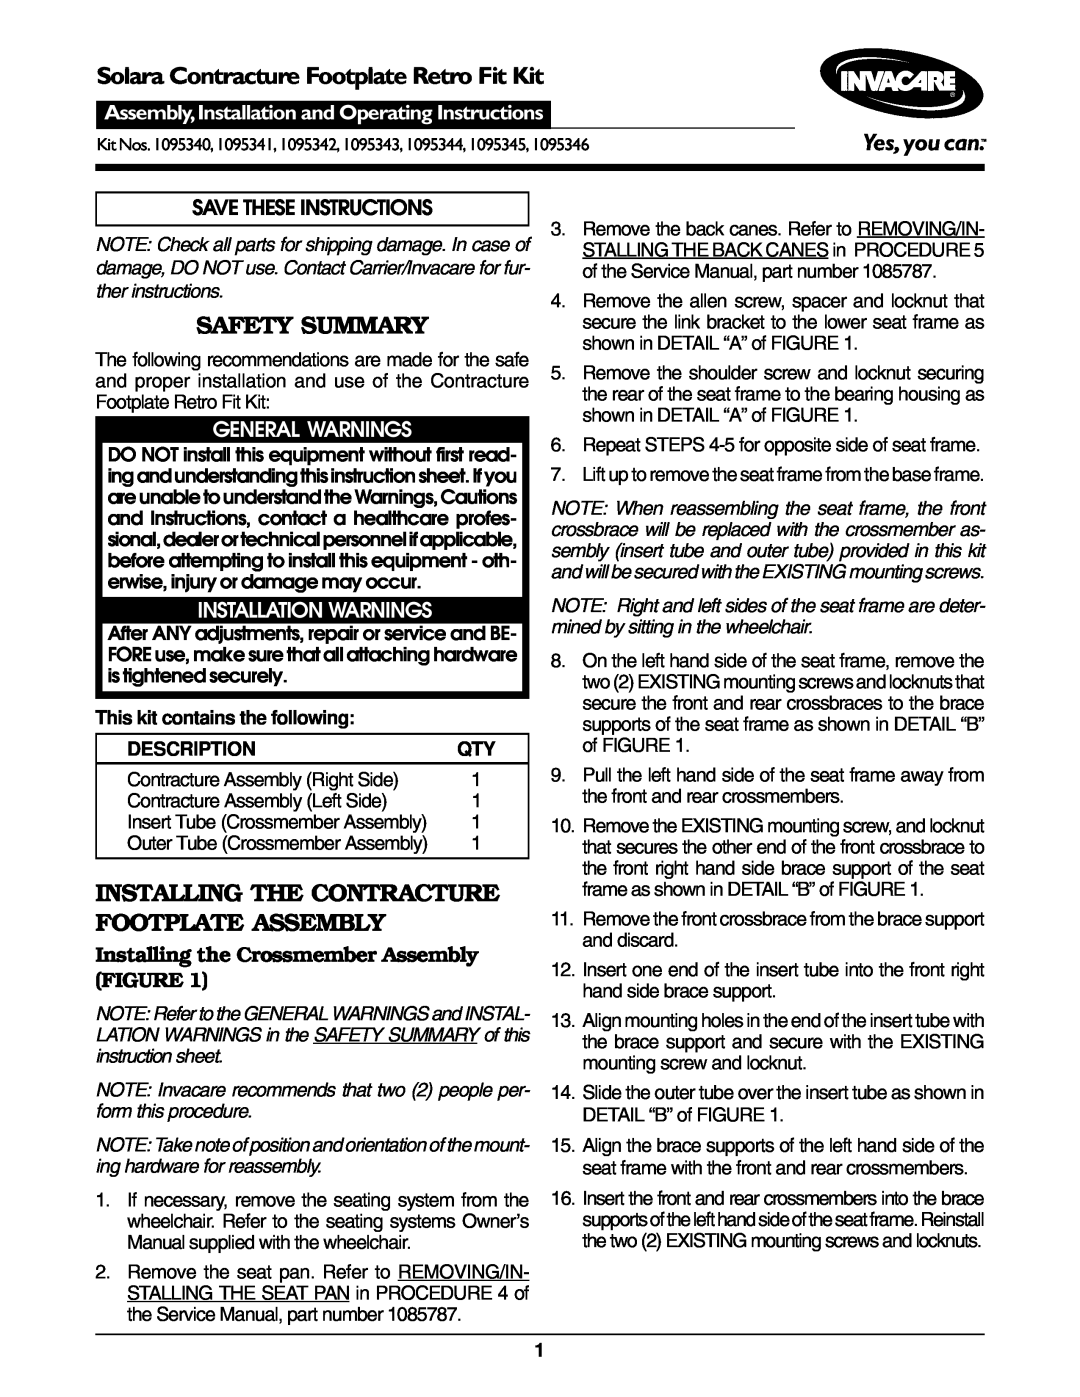 Invacare 1095343 operating instructions Safety Summary, Installing The Contracture Footplate Assembly, General Warnings 